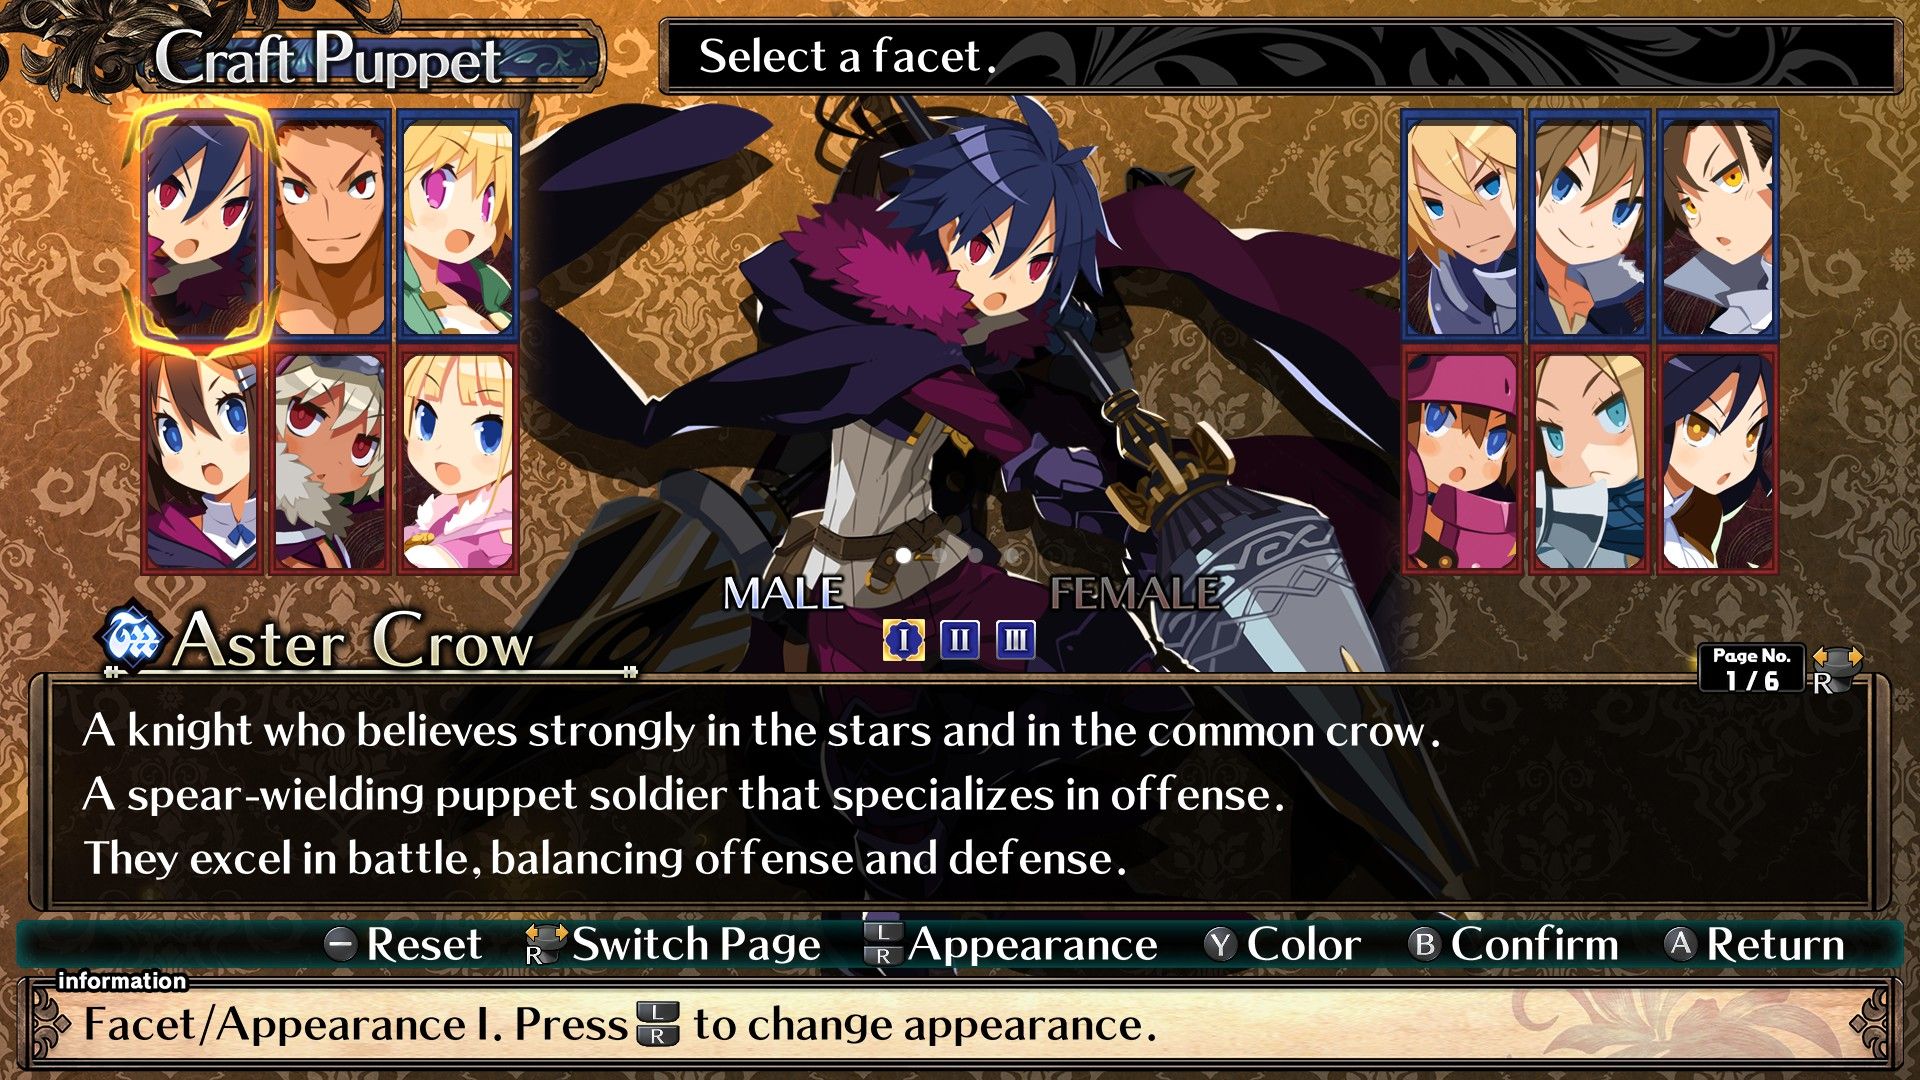 Labyrinth Of Galleria: The Moon Society Aster Crow character creation screen showing the male character and class description.